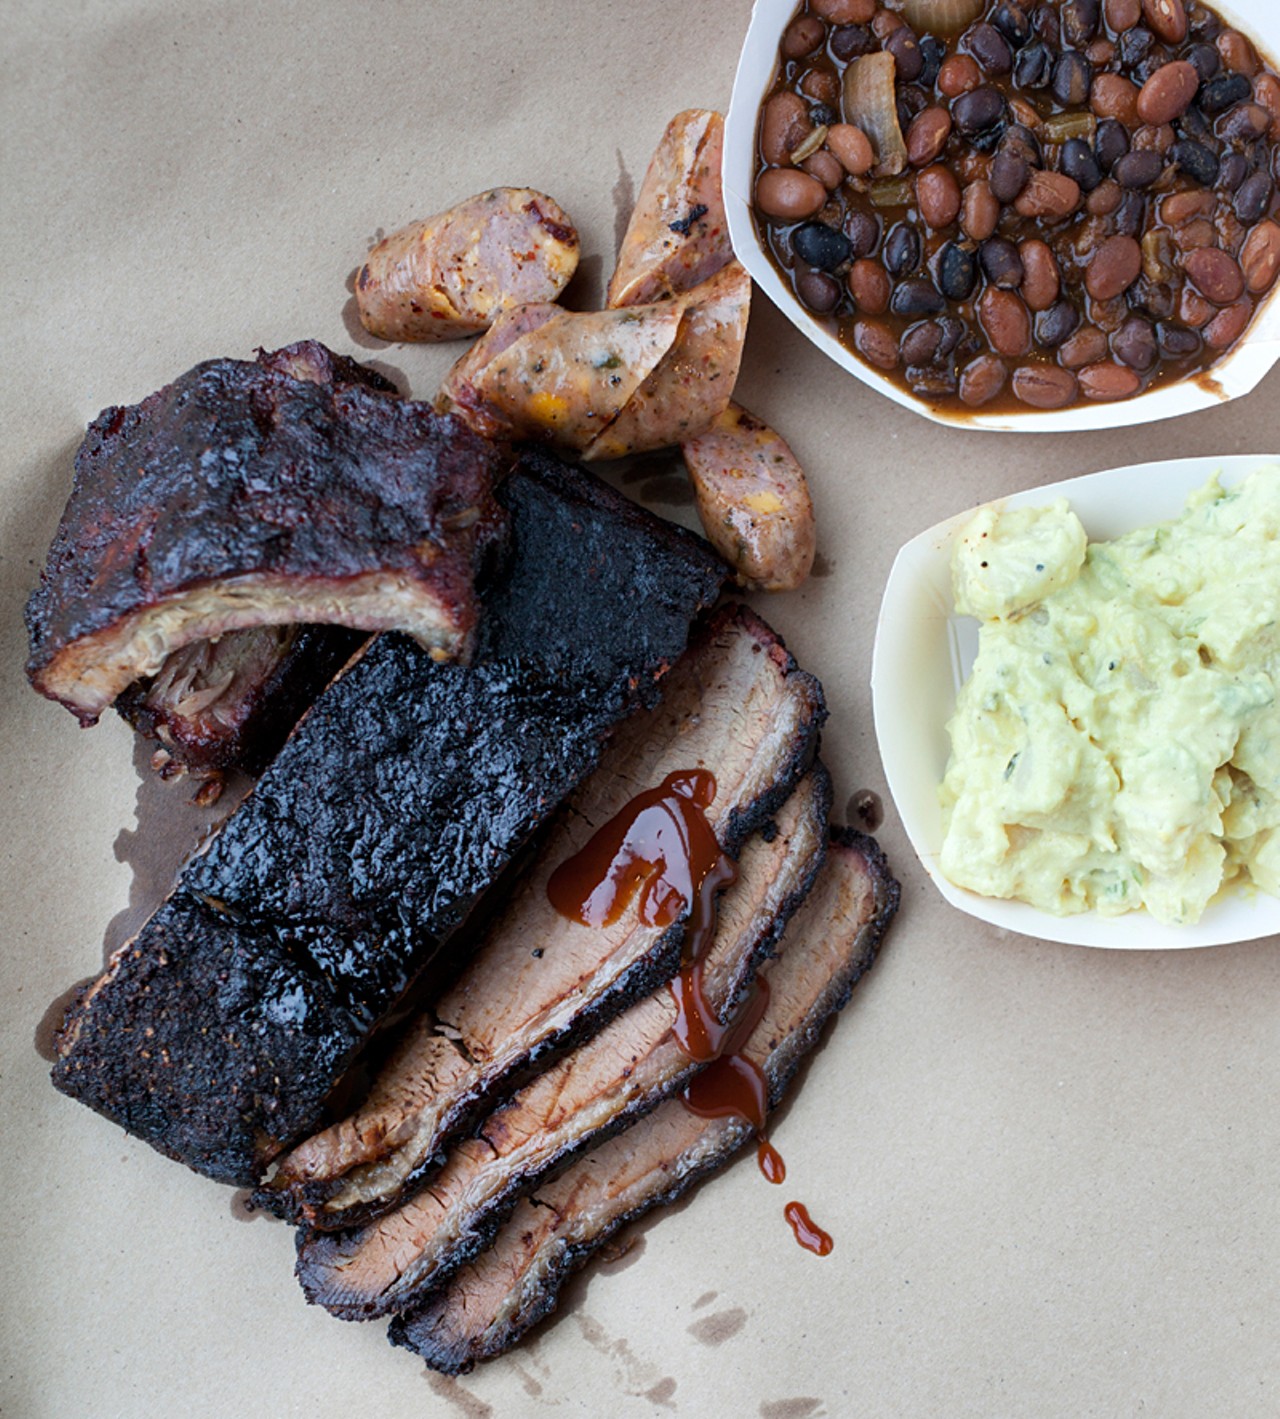 A display of the brisket, baby back ribs, housemade jalapeno sausage, baked beans and potato salad.